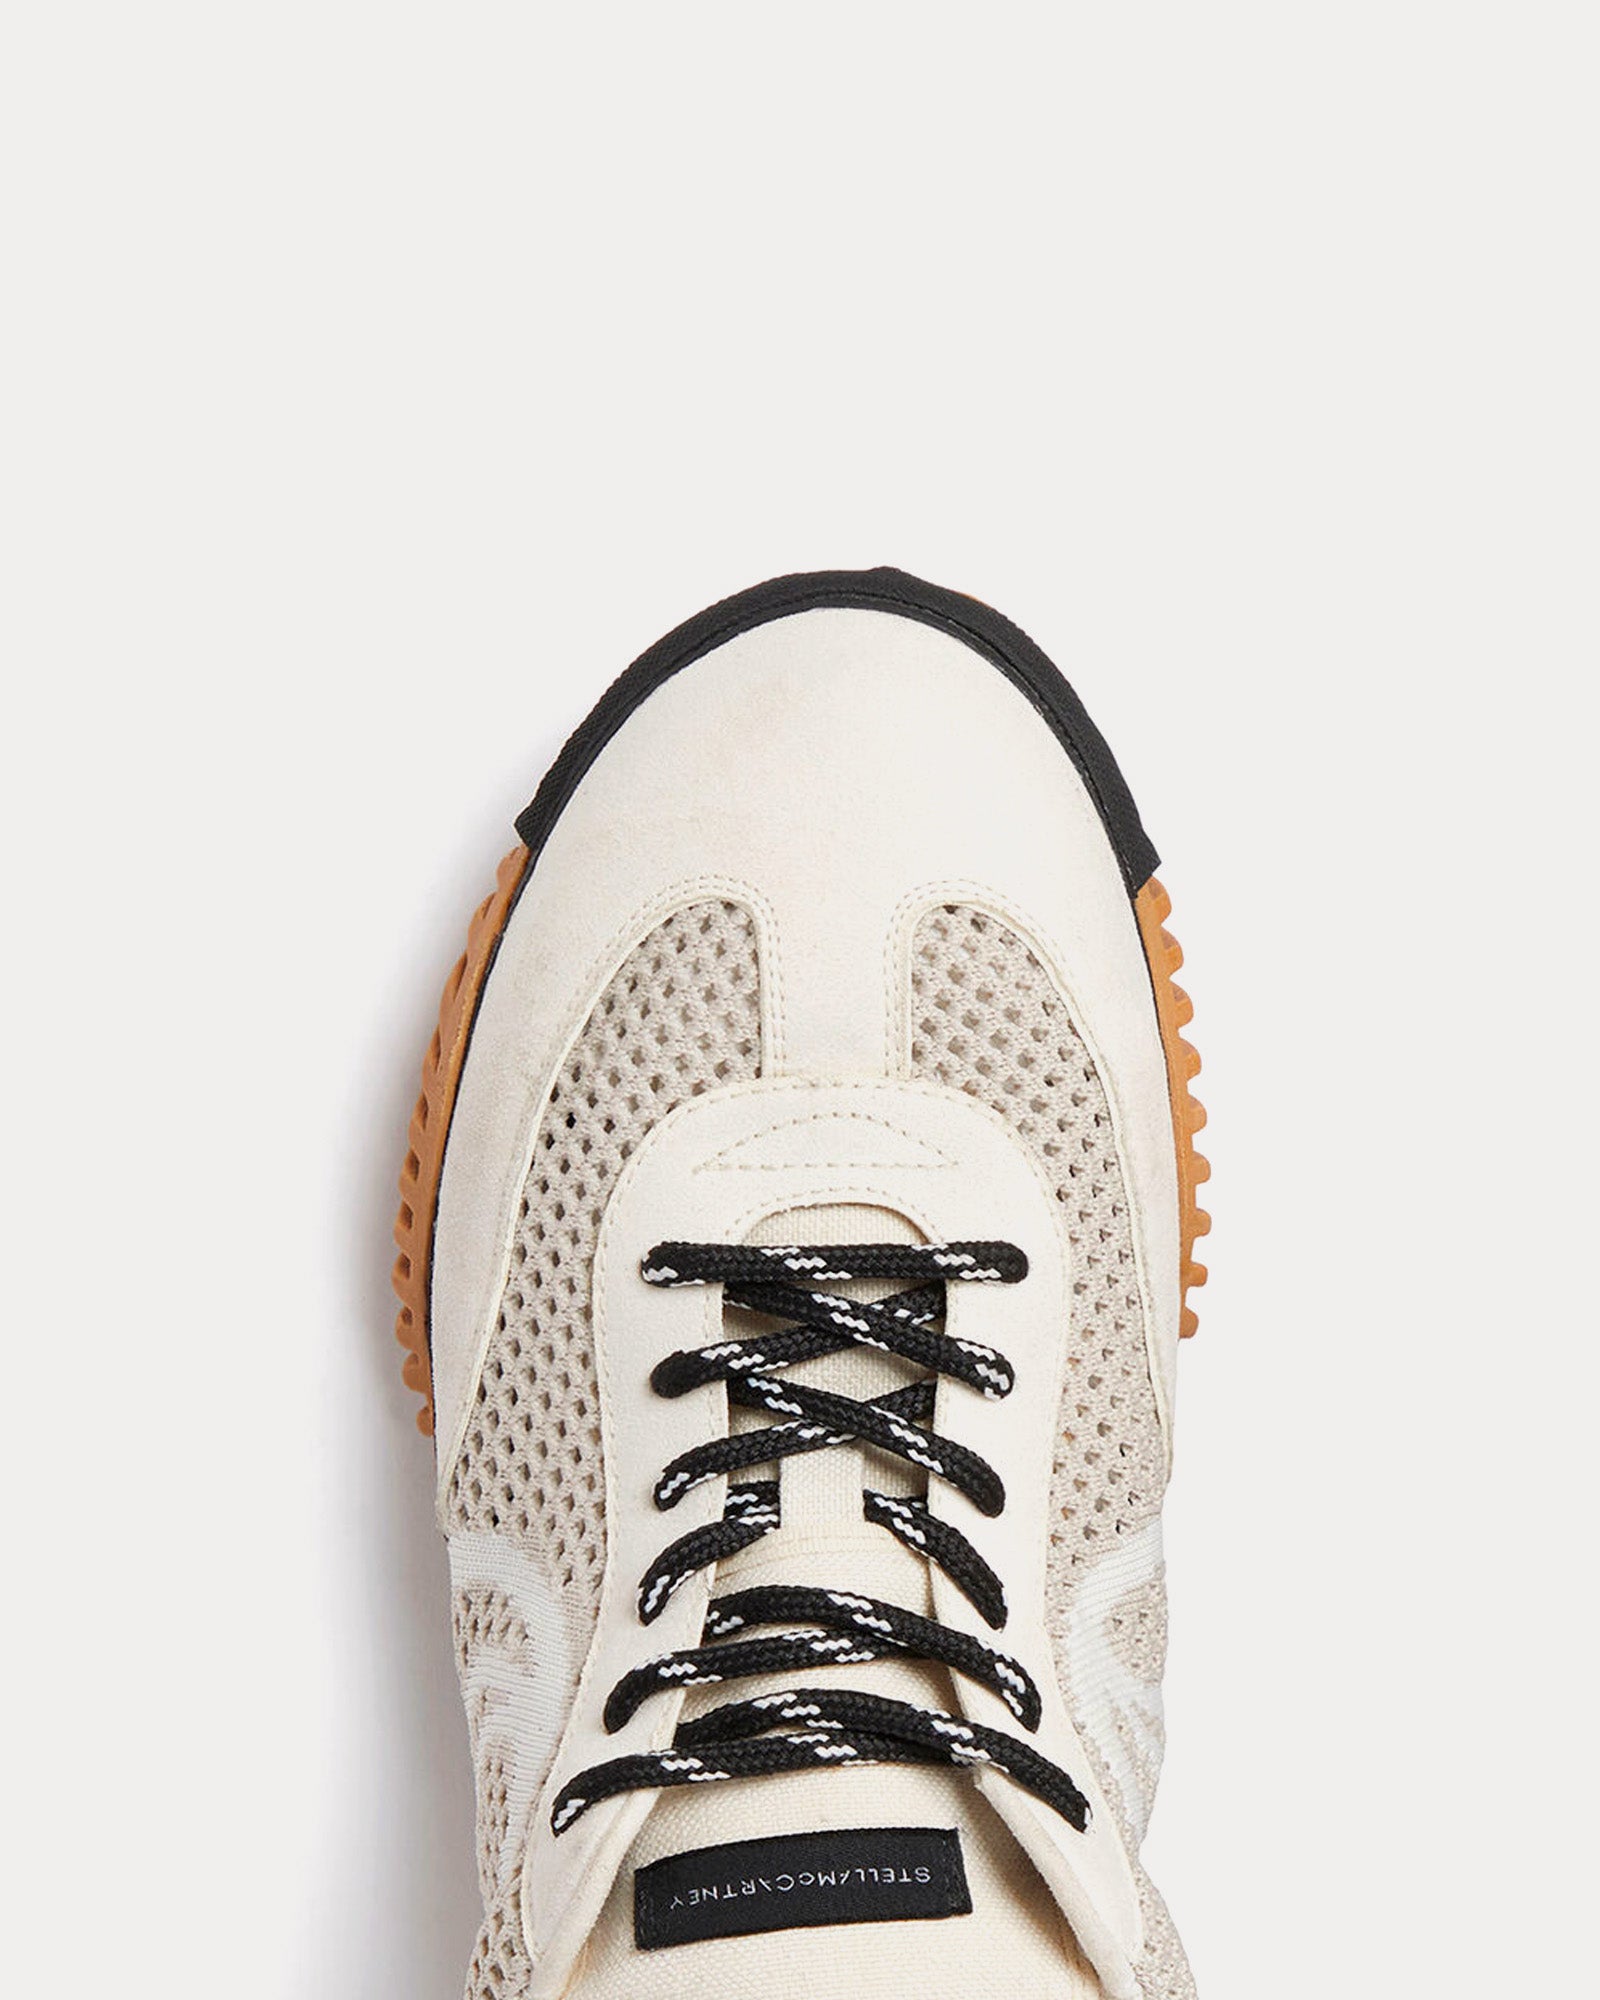 Stella McCartney - S-Wave Sport Mesh Panelled Pure White Low Top Sneakers